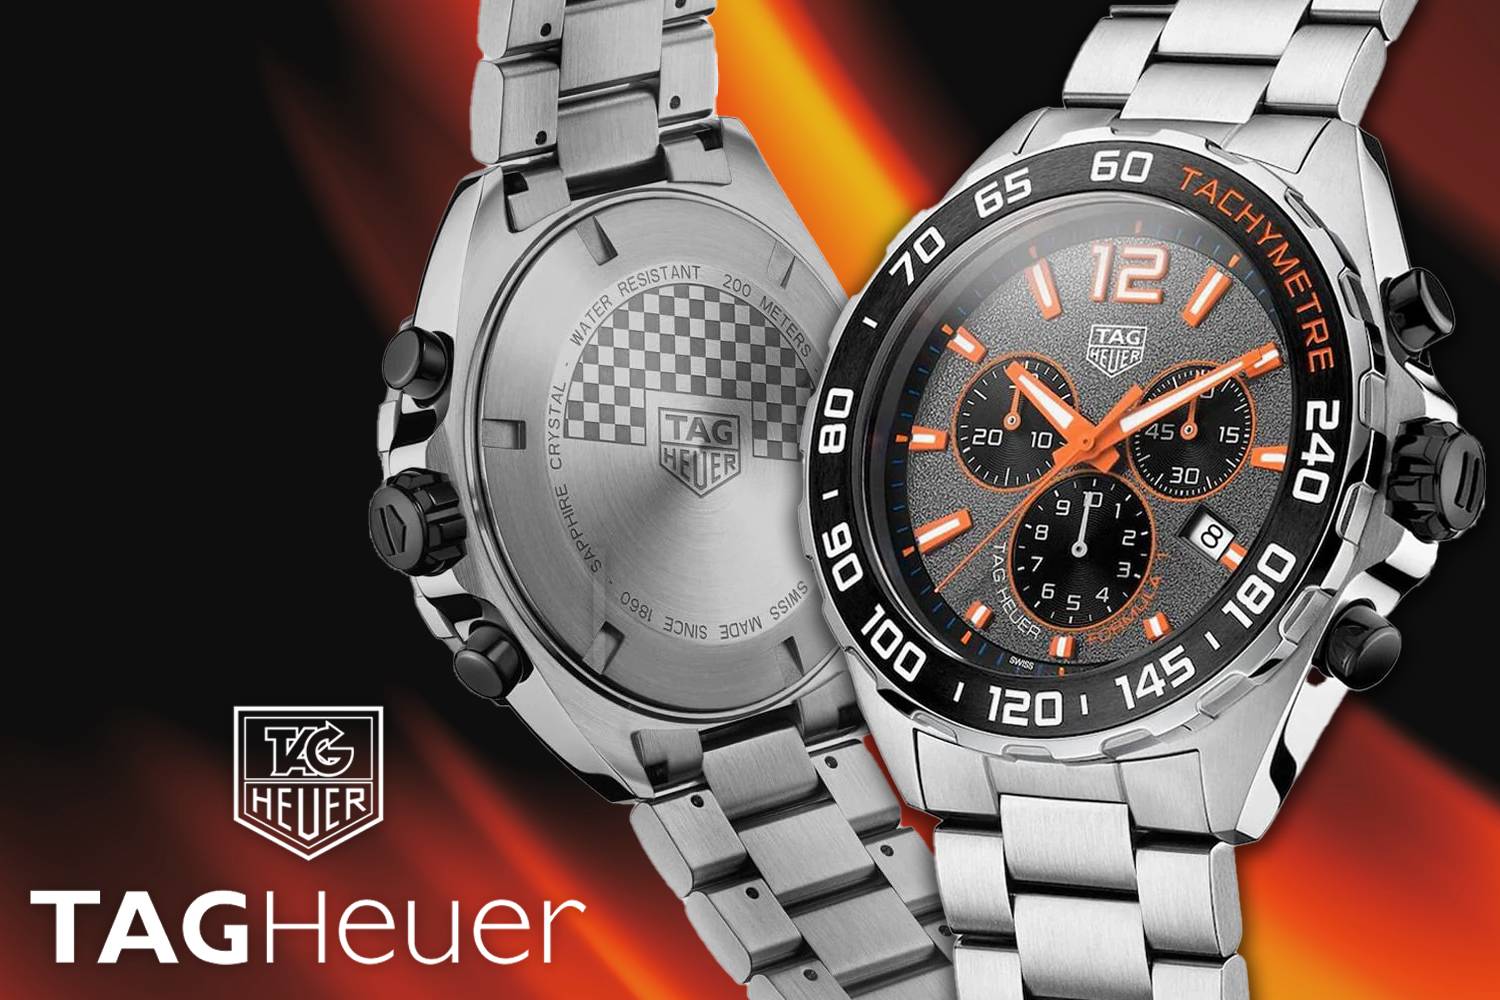 Win this Tag Heuer Watch Formula 1 Chronograph